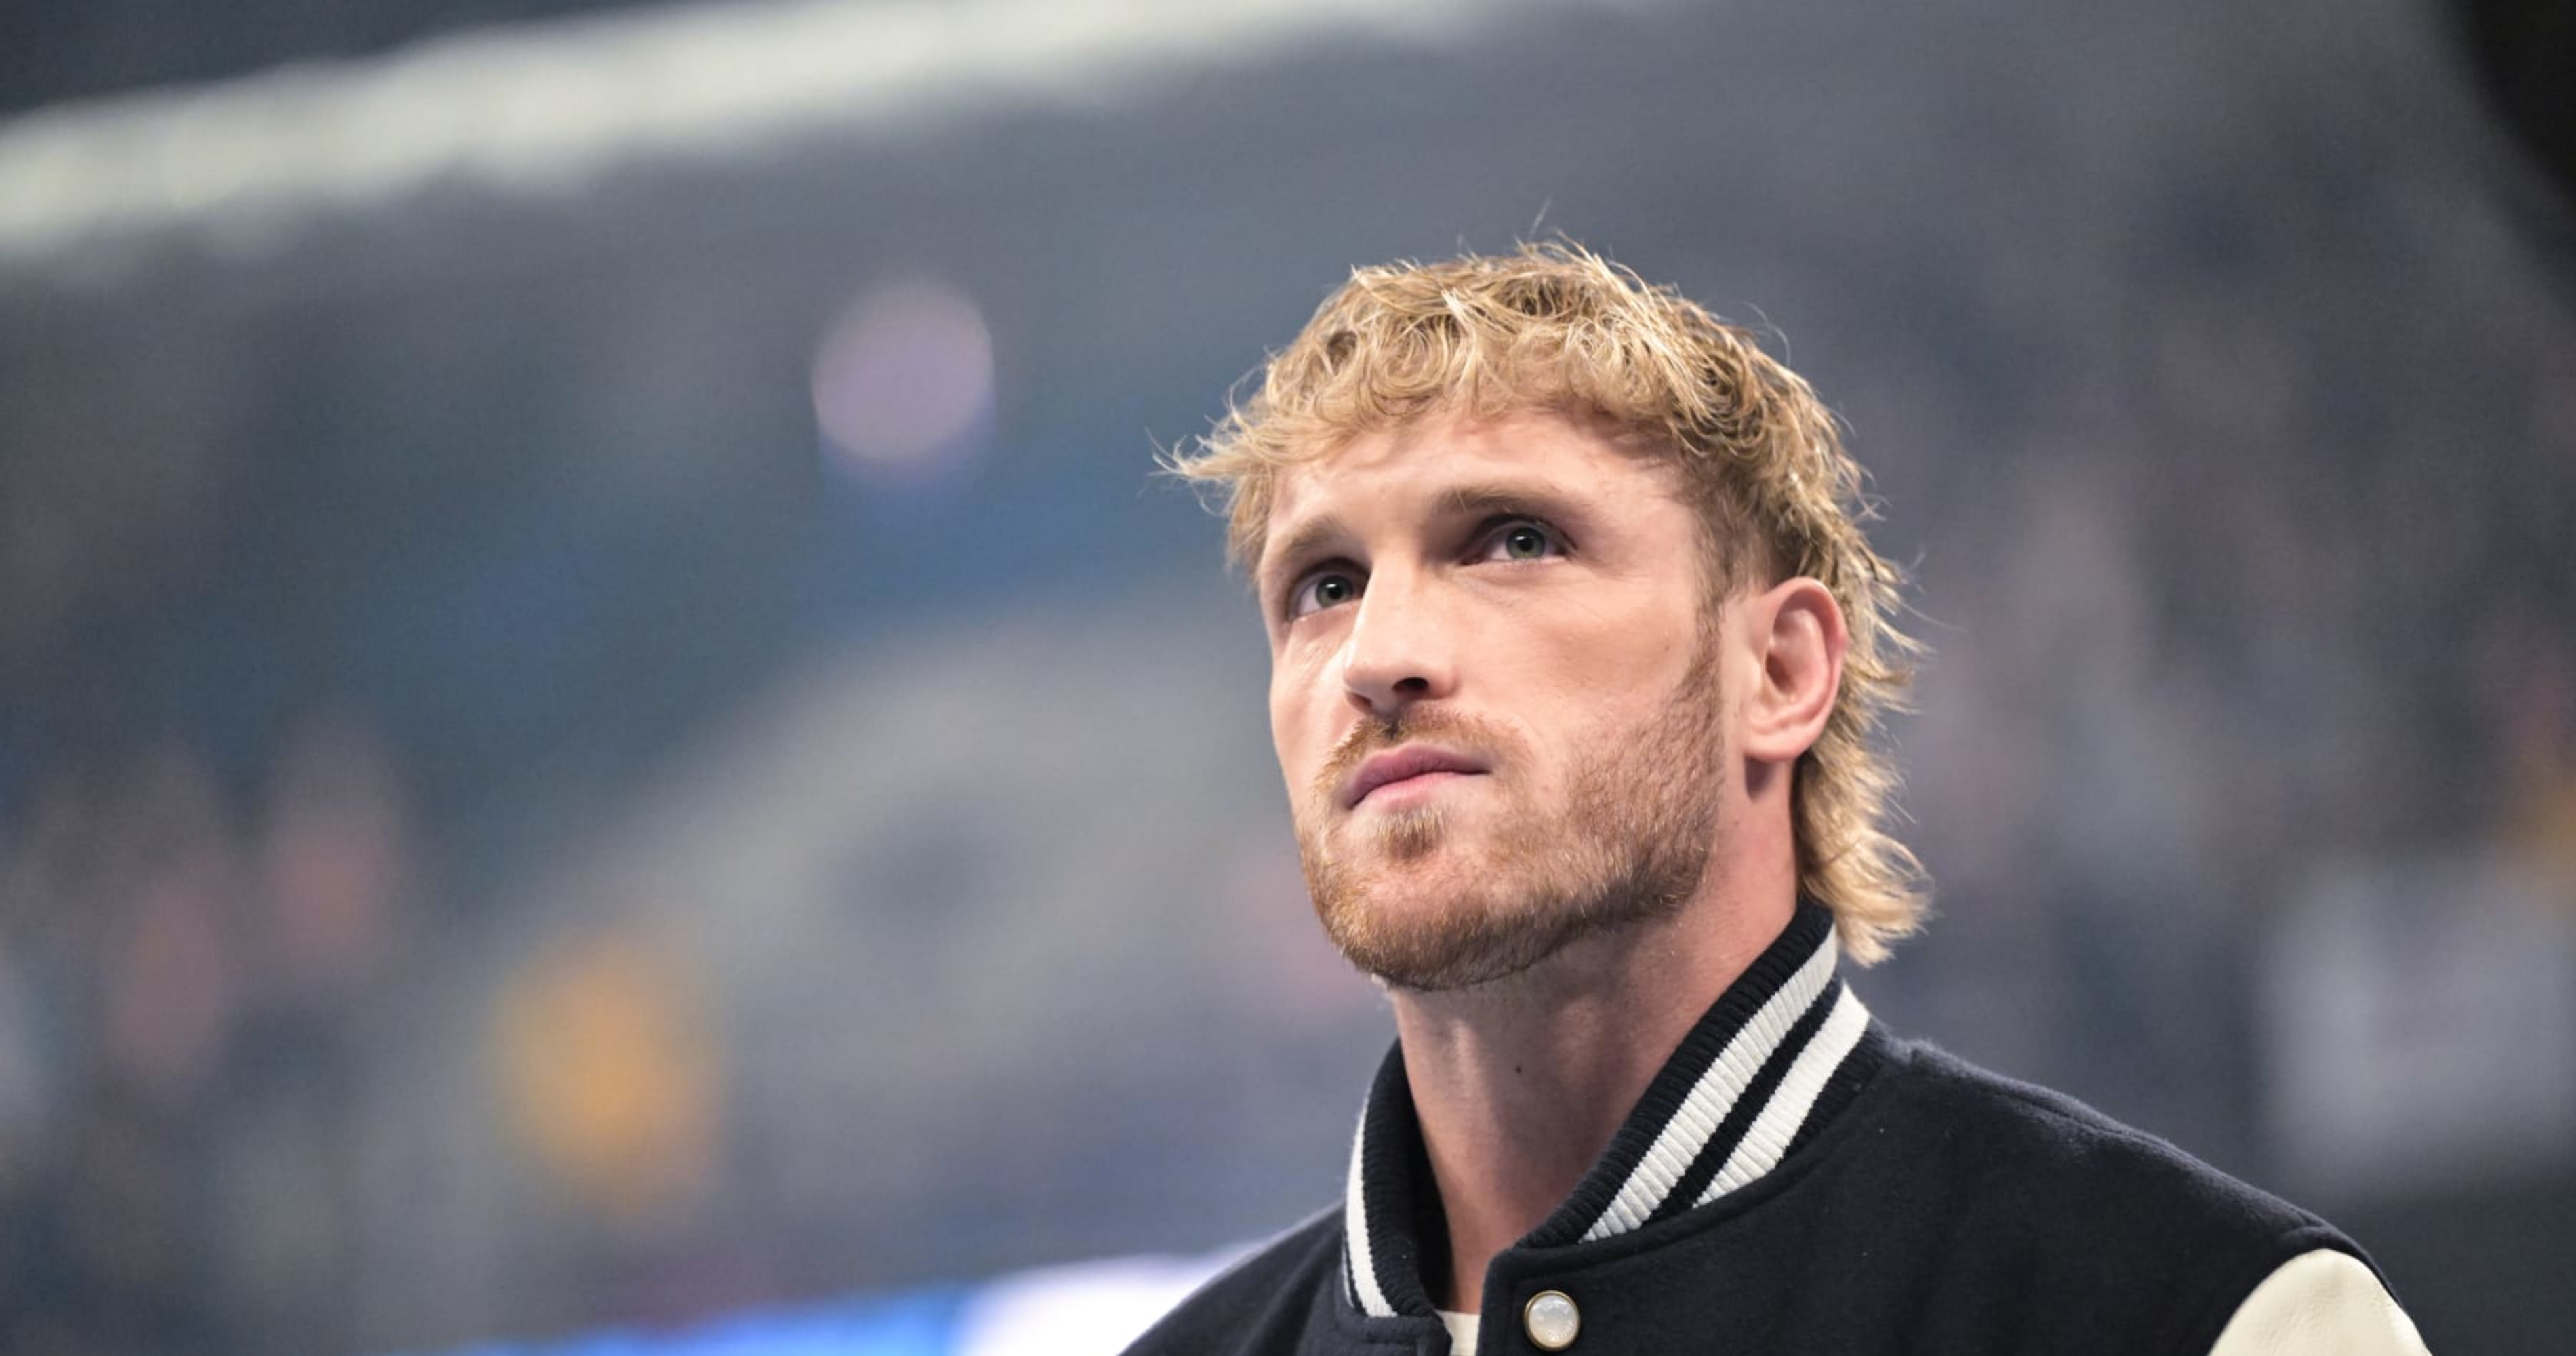 WWE's Logan Paul Calls Out Ryan Garcia for Reportedly Failing PED Test